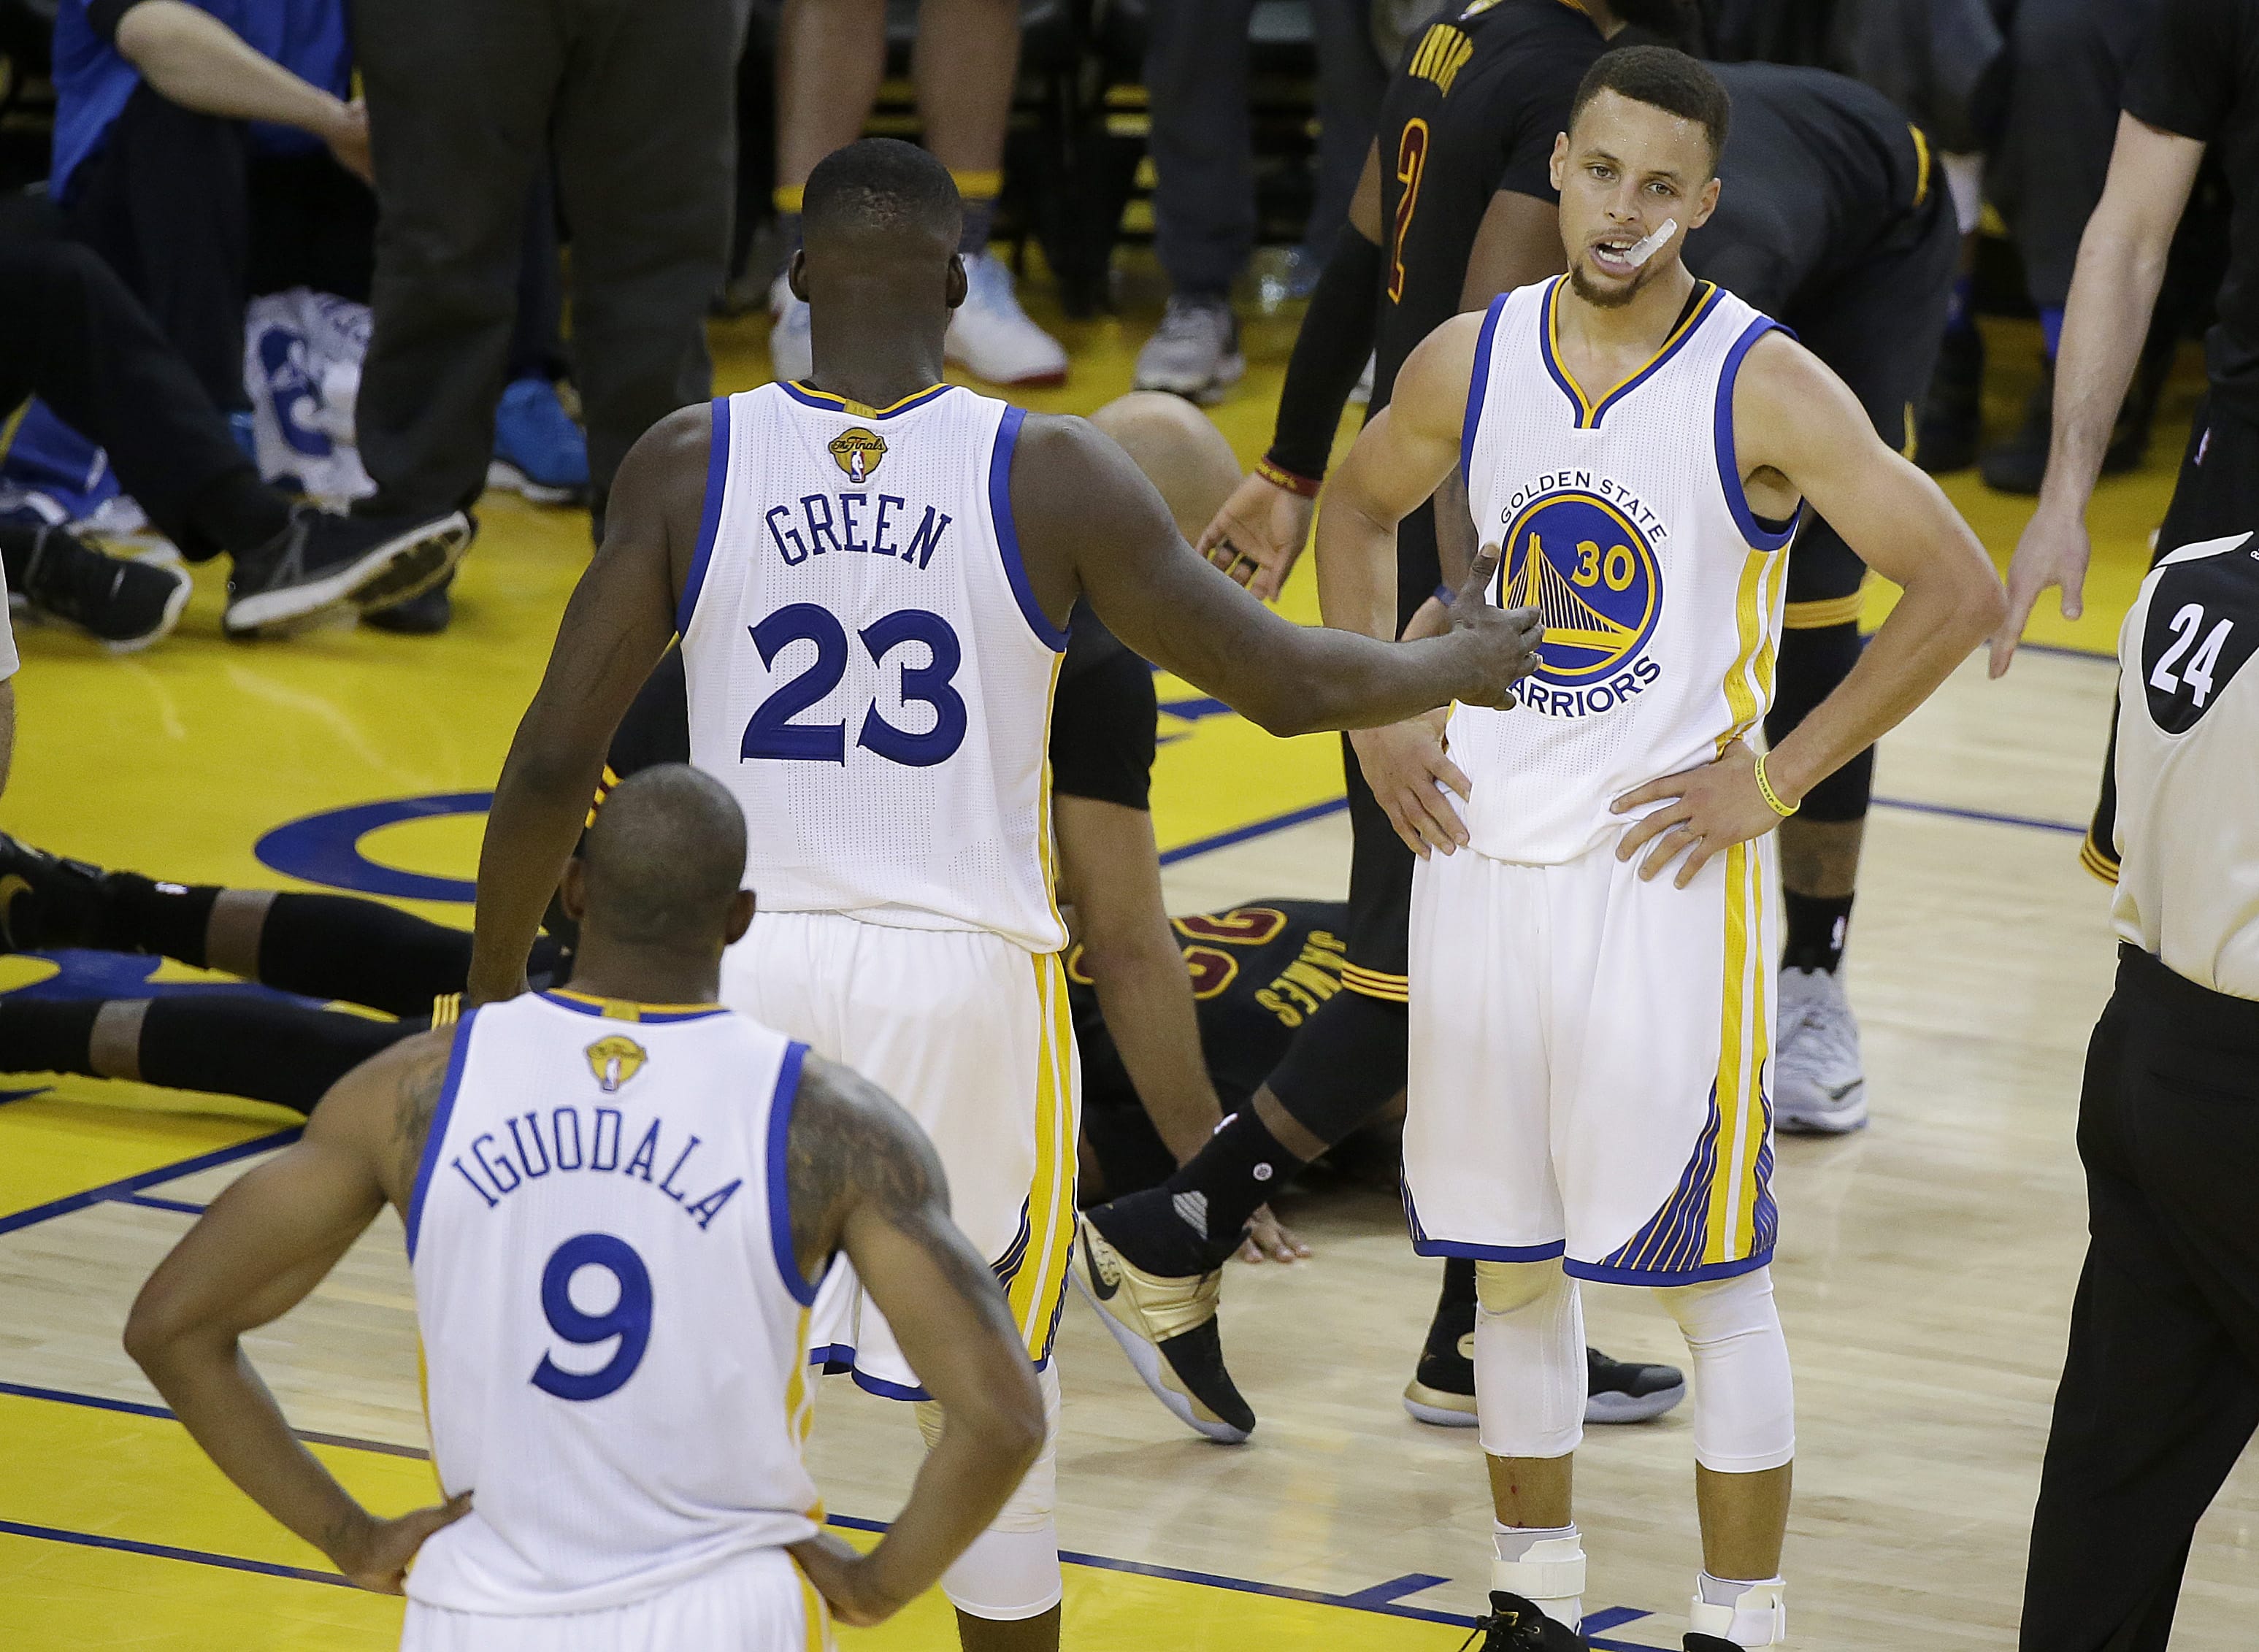 Golden State Warriors guard Stephen Curry (30), forward LeBron James (23) and forward Andre Iguodala (9) stand on the court as Cleveland Cavaliers forward LeBron James, on ground, is tended to during the second half of Game 7 of basketball's NBA Finals in Oakland, Calif., Sunday, June 19, 2016. The Cavaliers won 93-89.